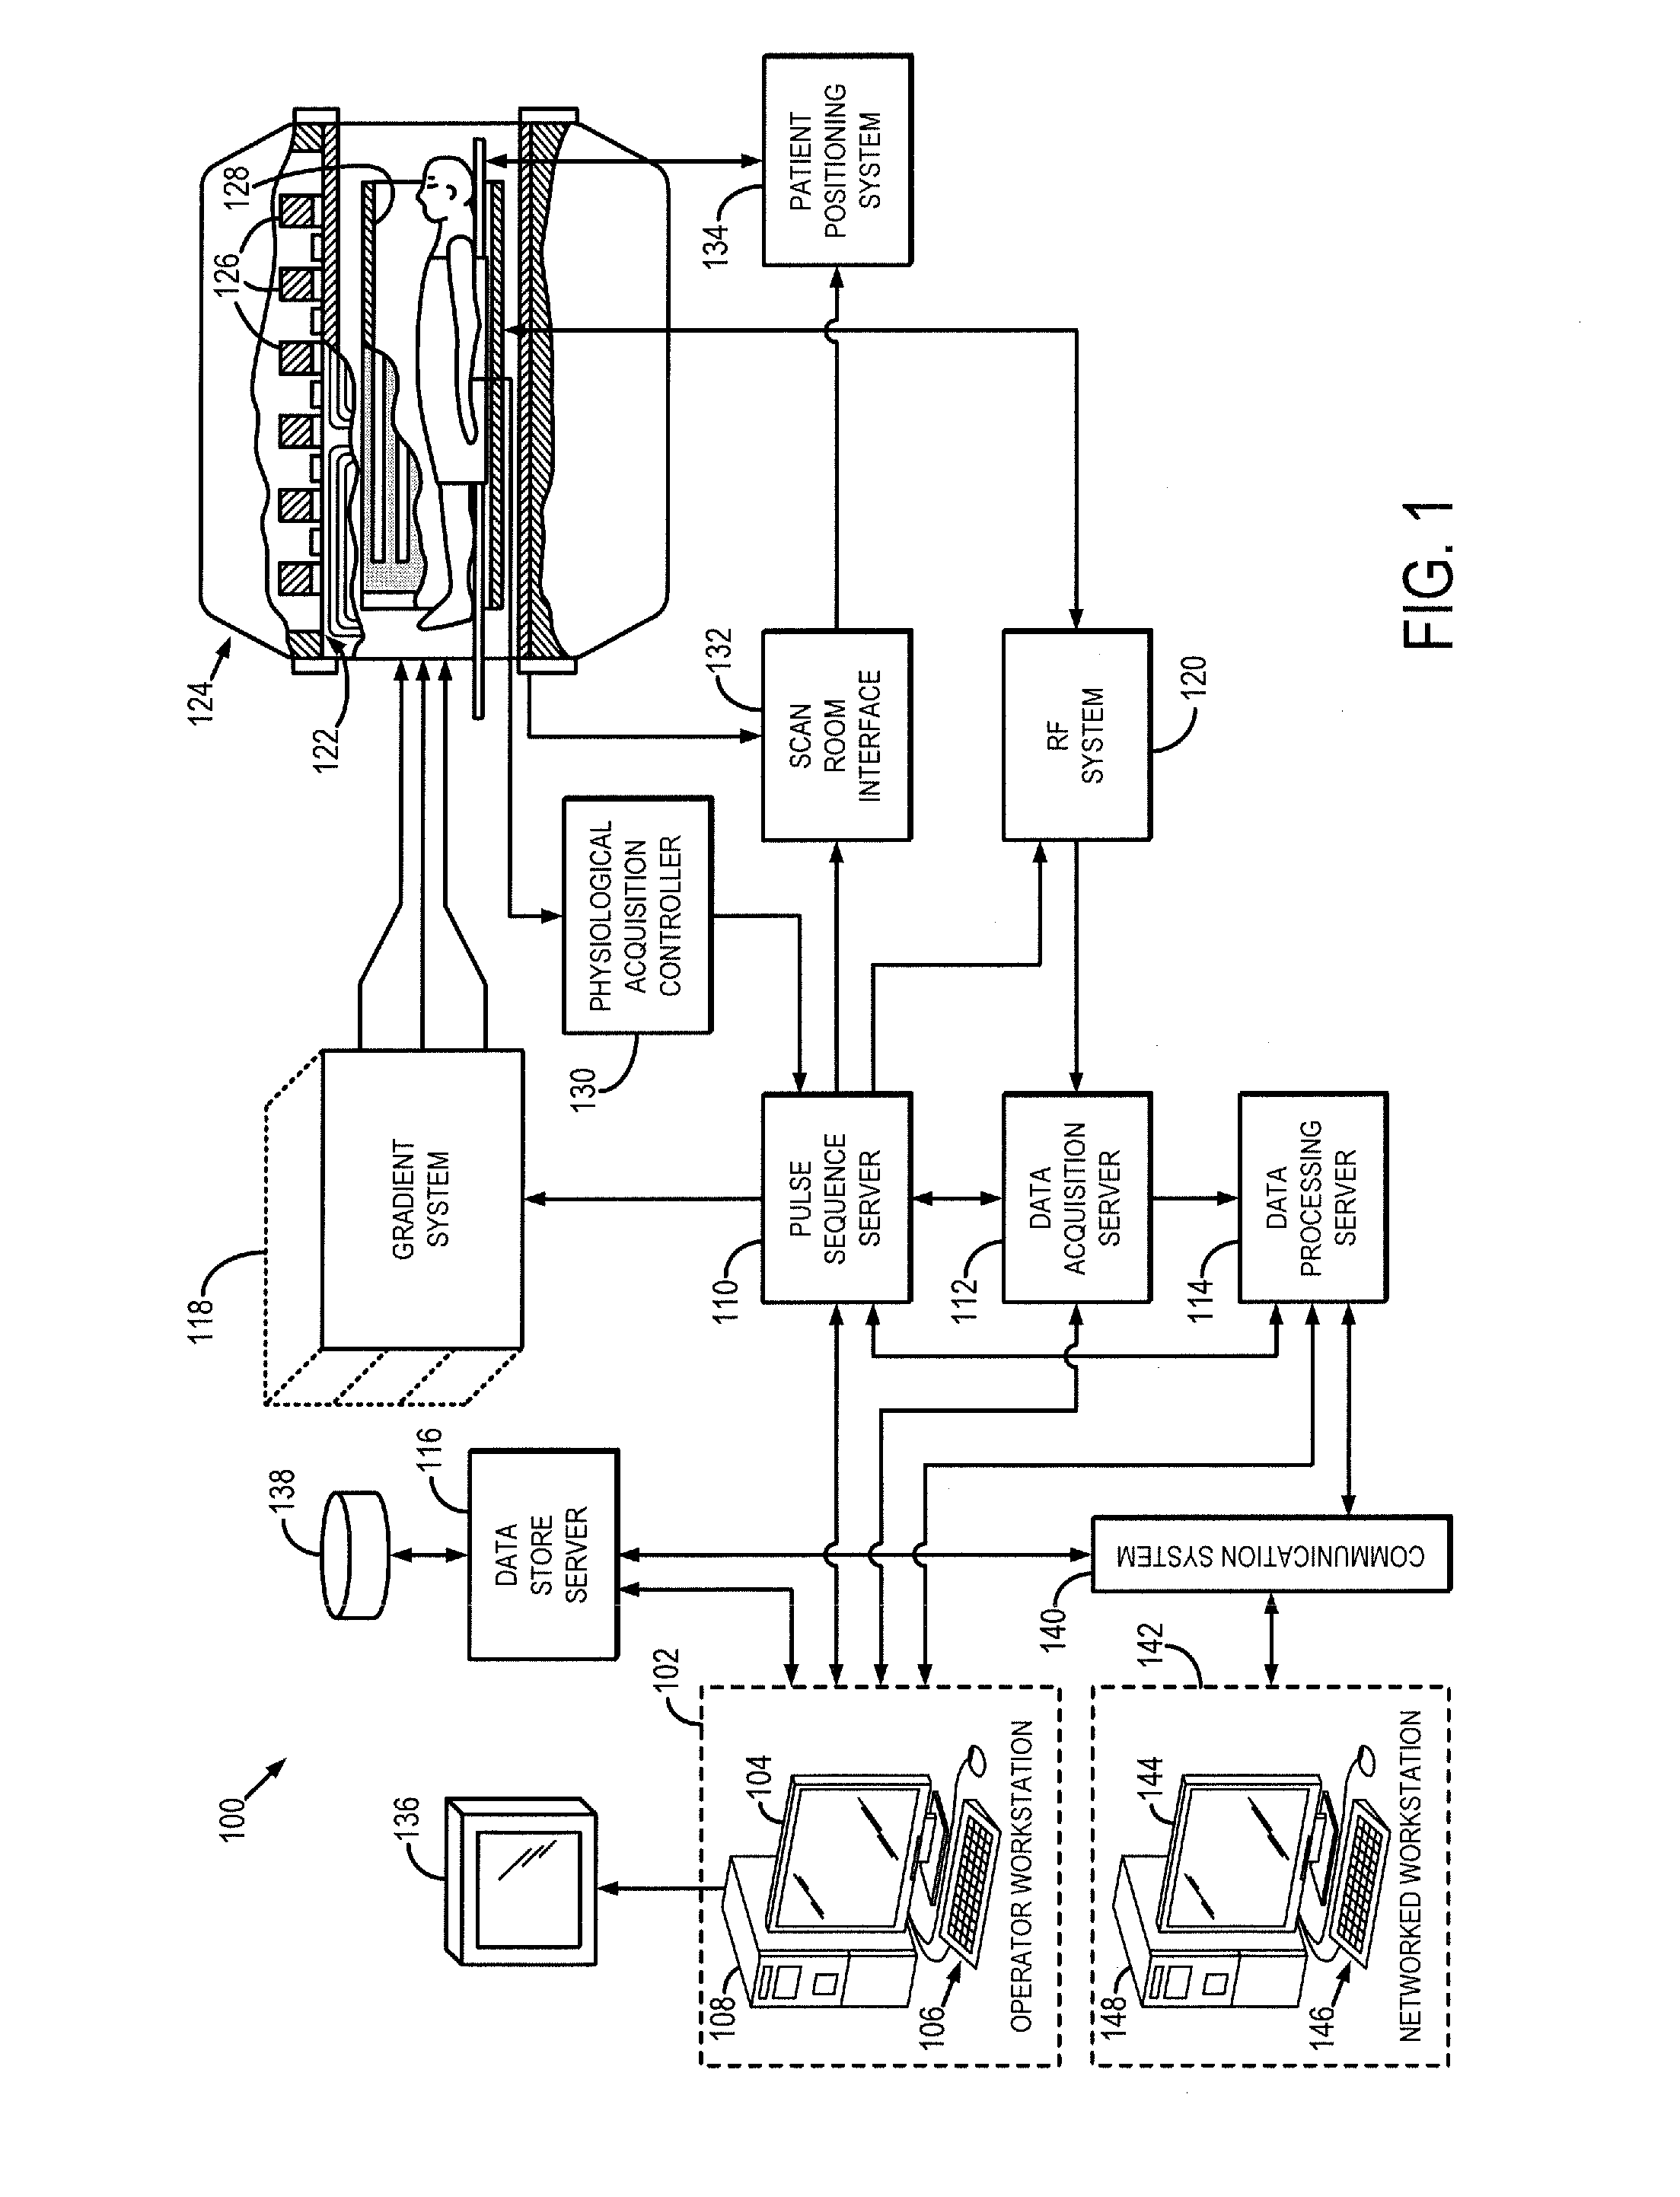 System and method for z-shim compensated echo-planar magnetic resonance imaging